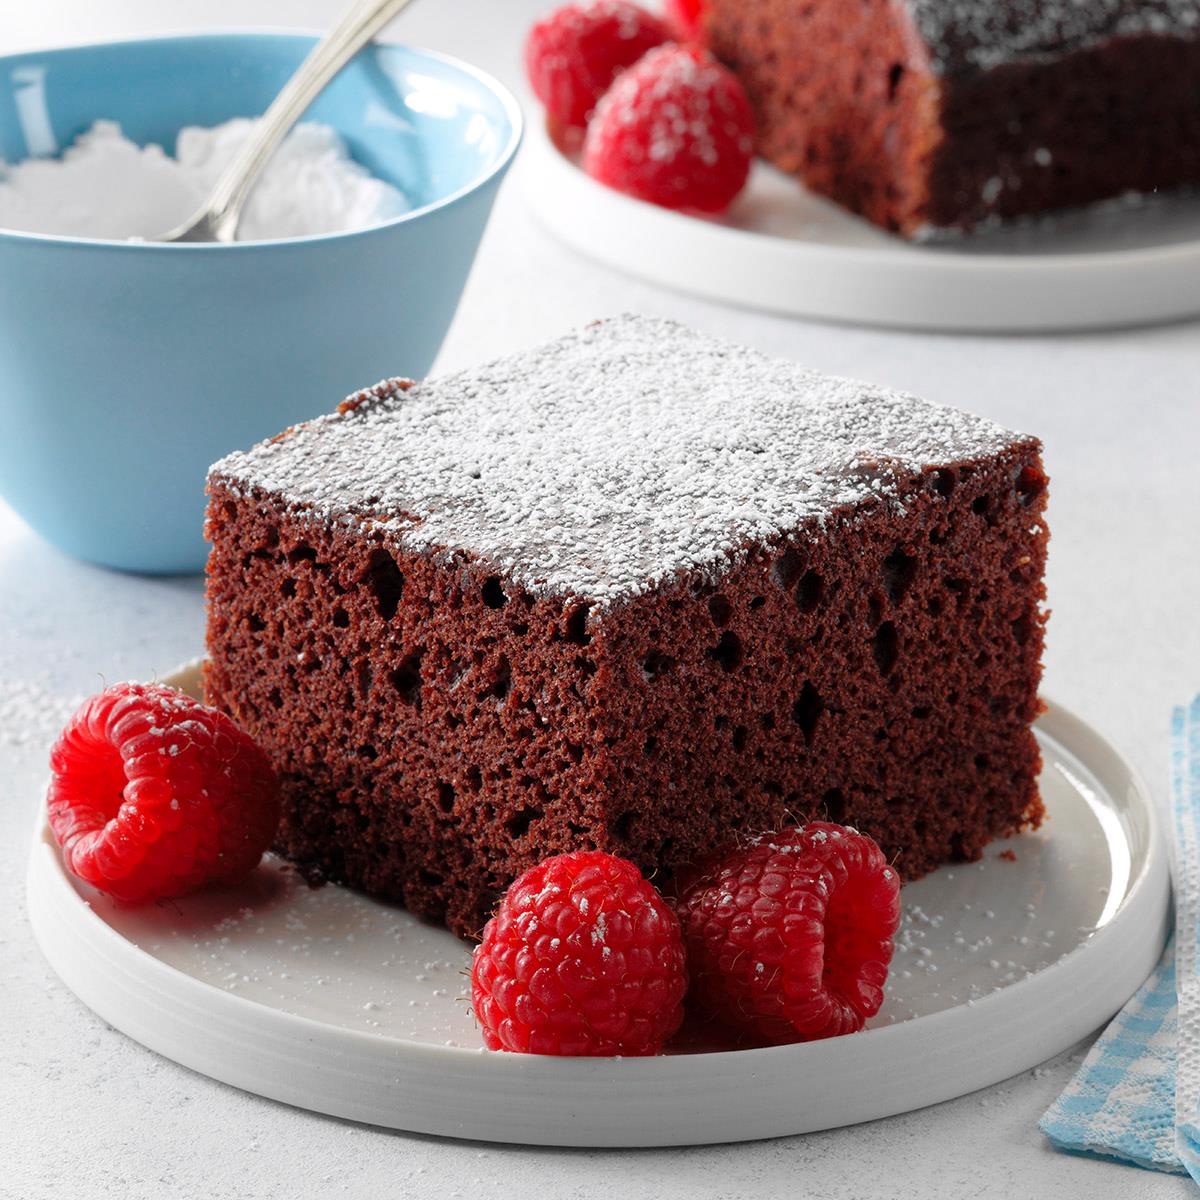 Cocoa Cake Recipe How To Make It Taste Of Home